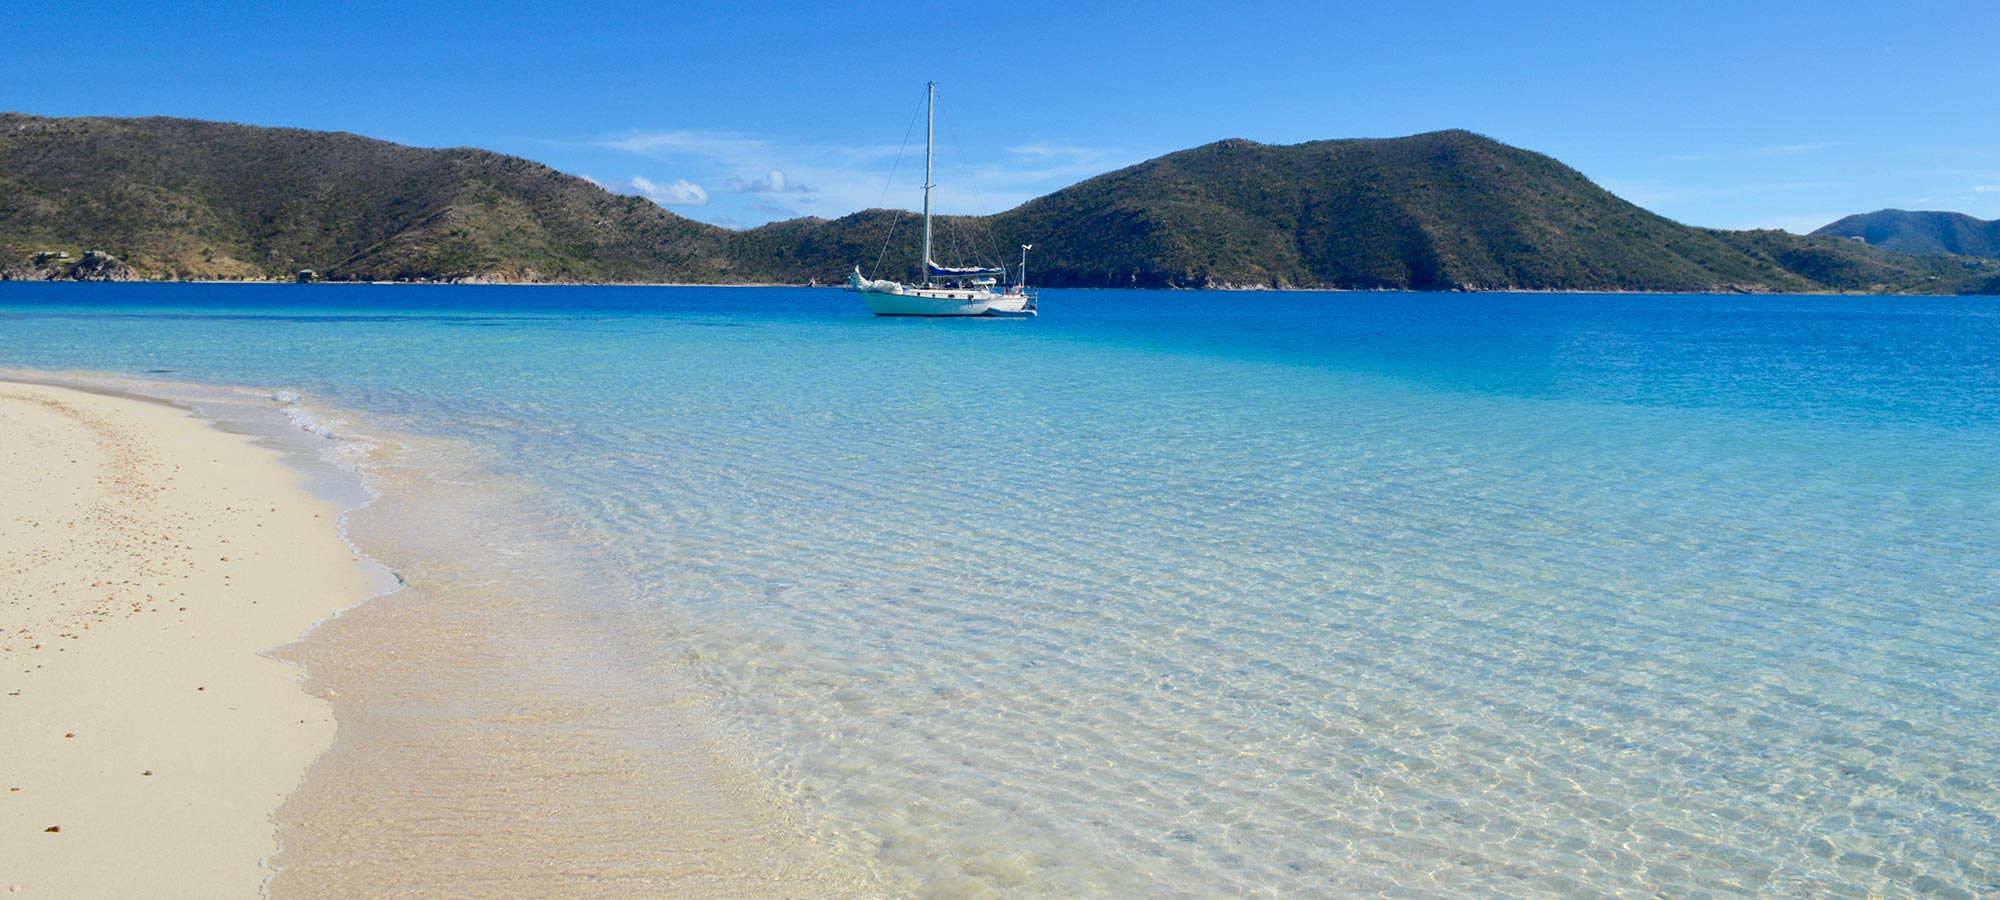 An inside look at how popular mooring locations in the BVI are recovering from the hurricanes.